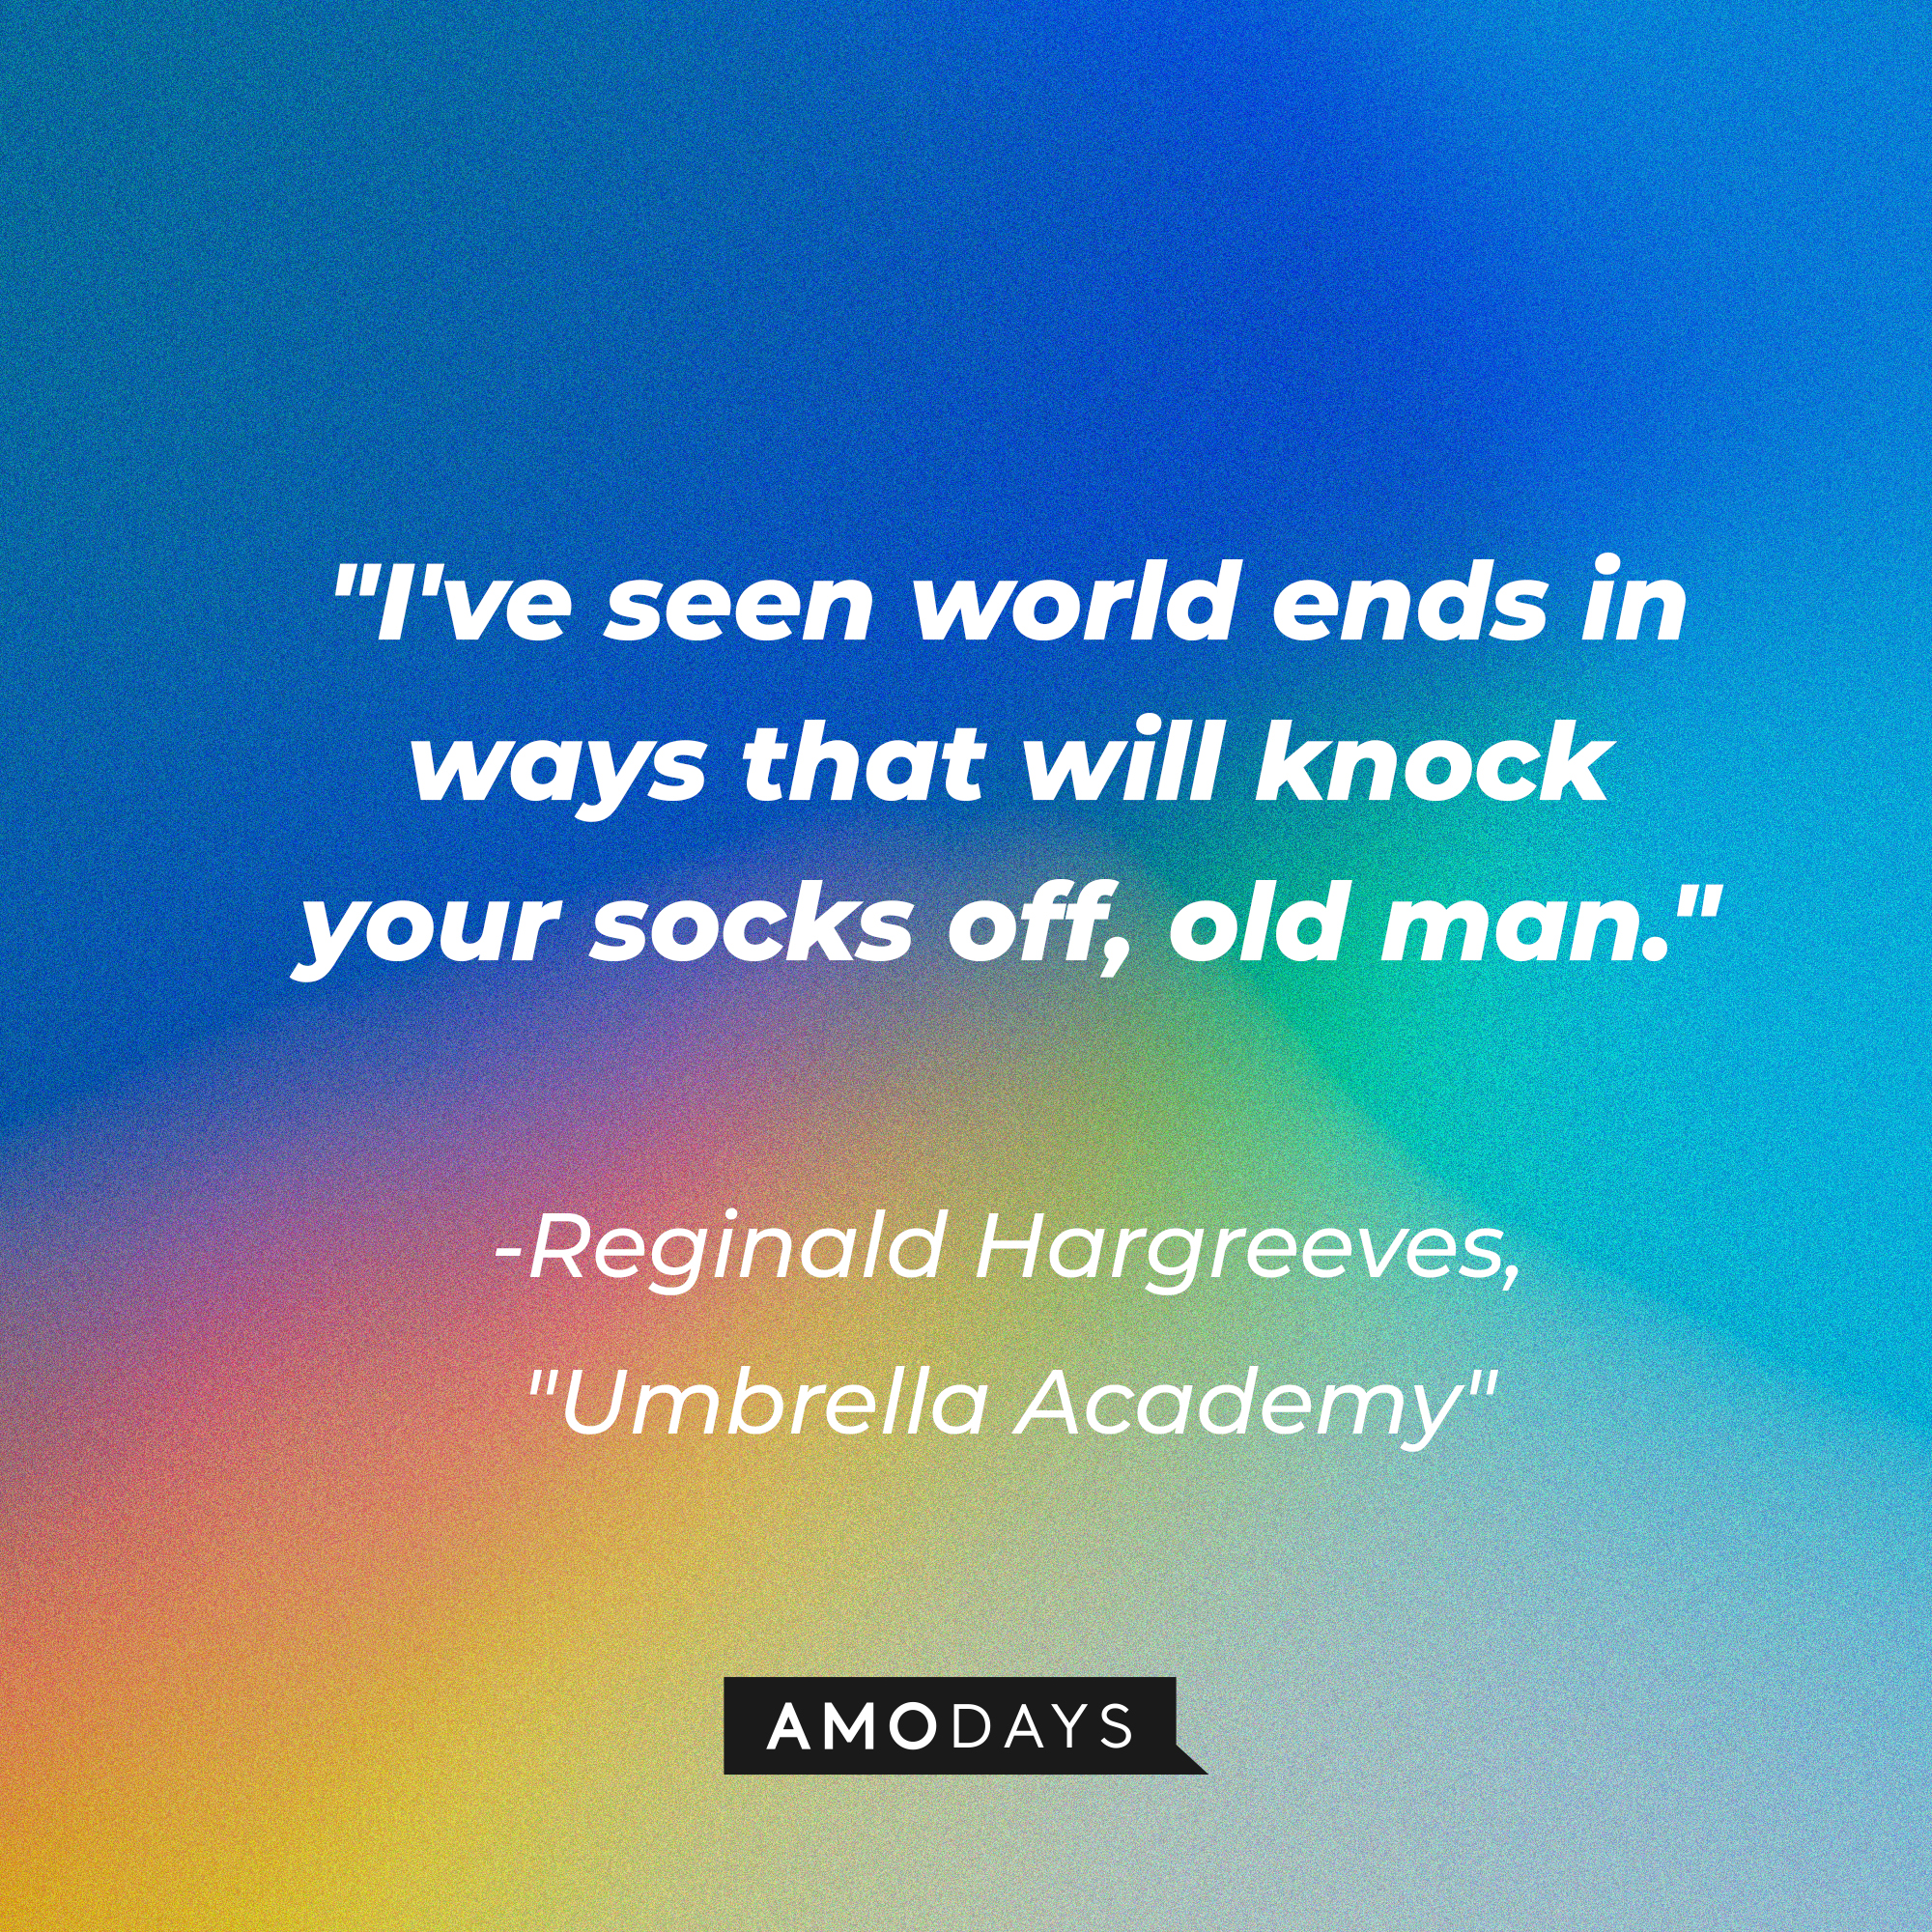 Reginald Hargreeves' quote in "The Umbrella Academy:" "I've seen world ends in ways that will knock your socks off, old man." | Source: AmoDays